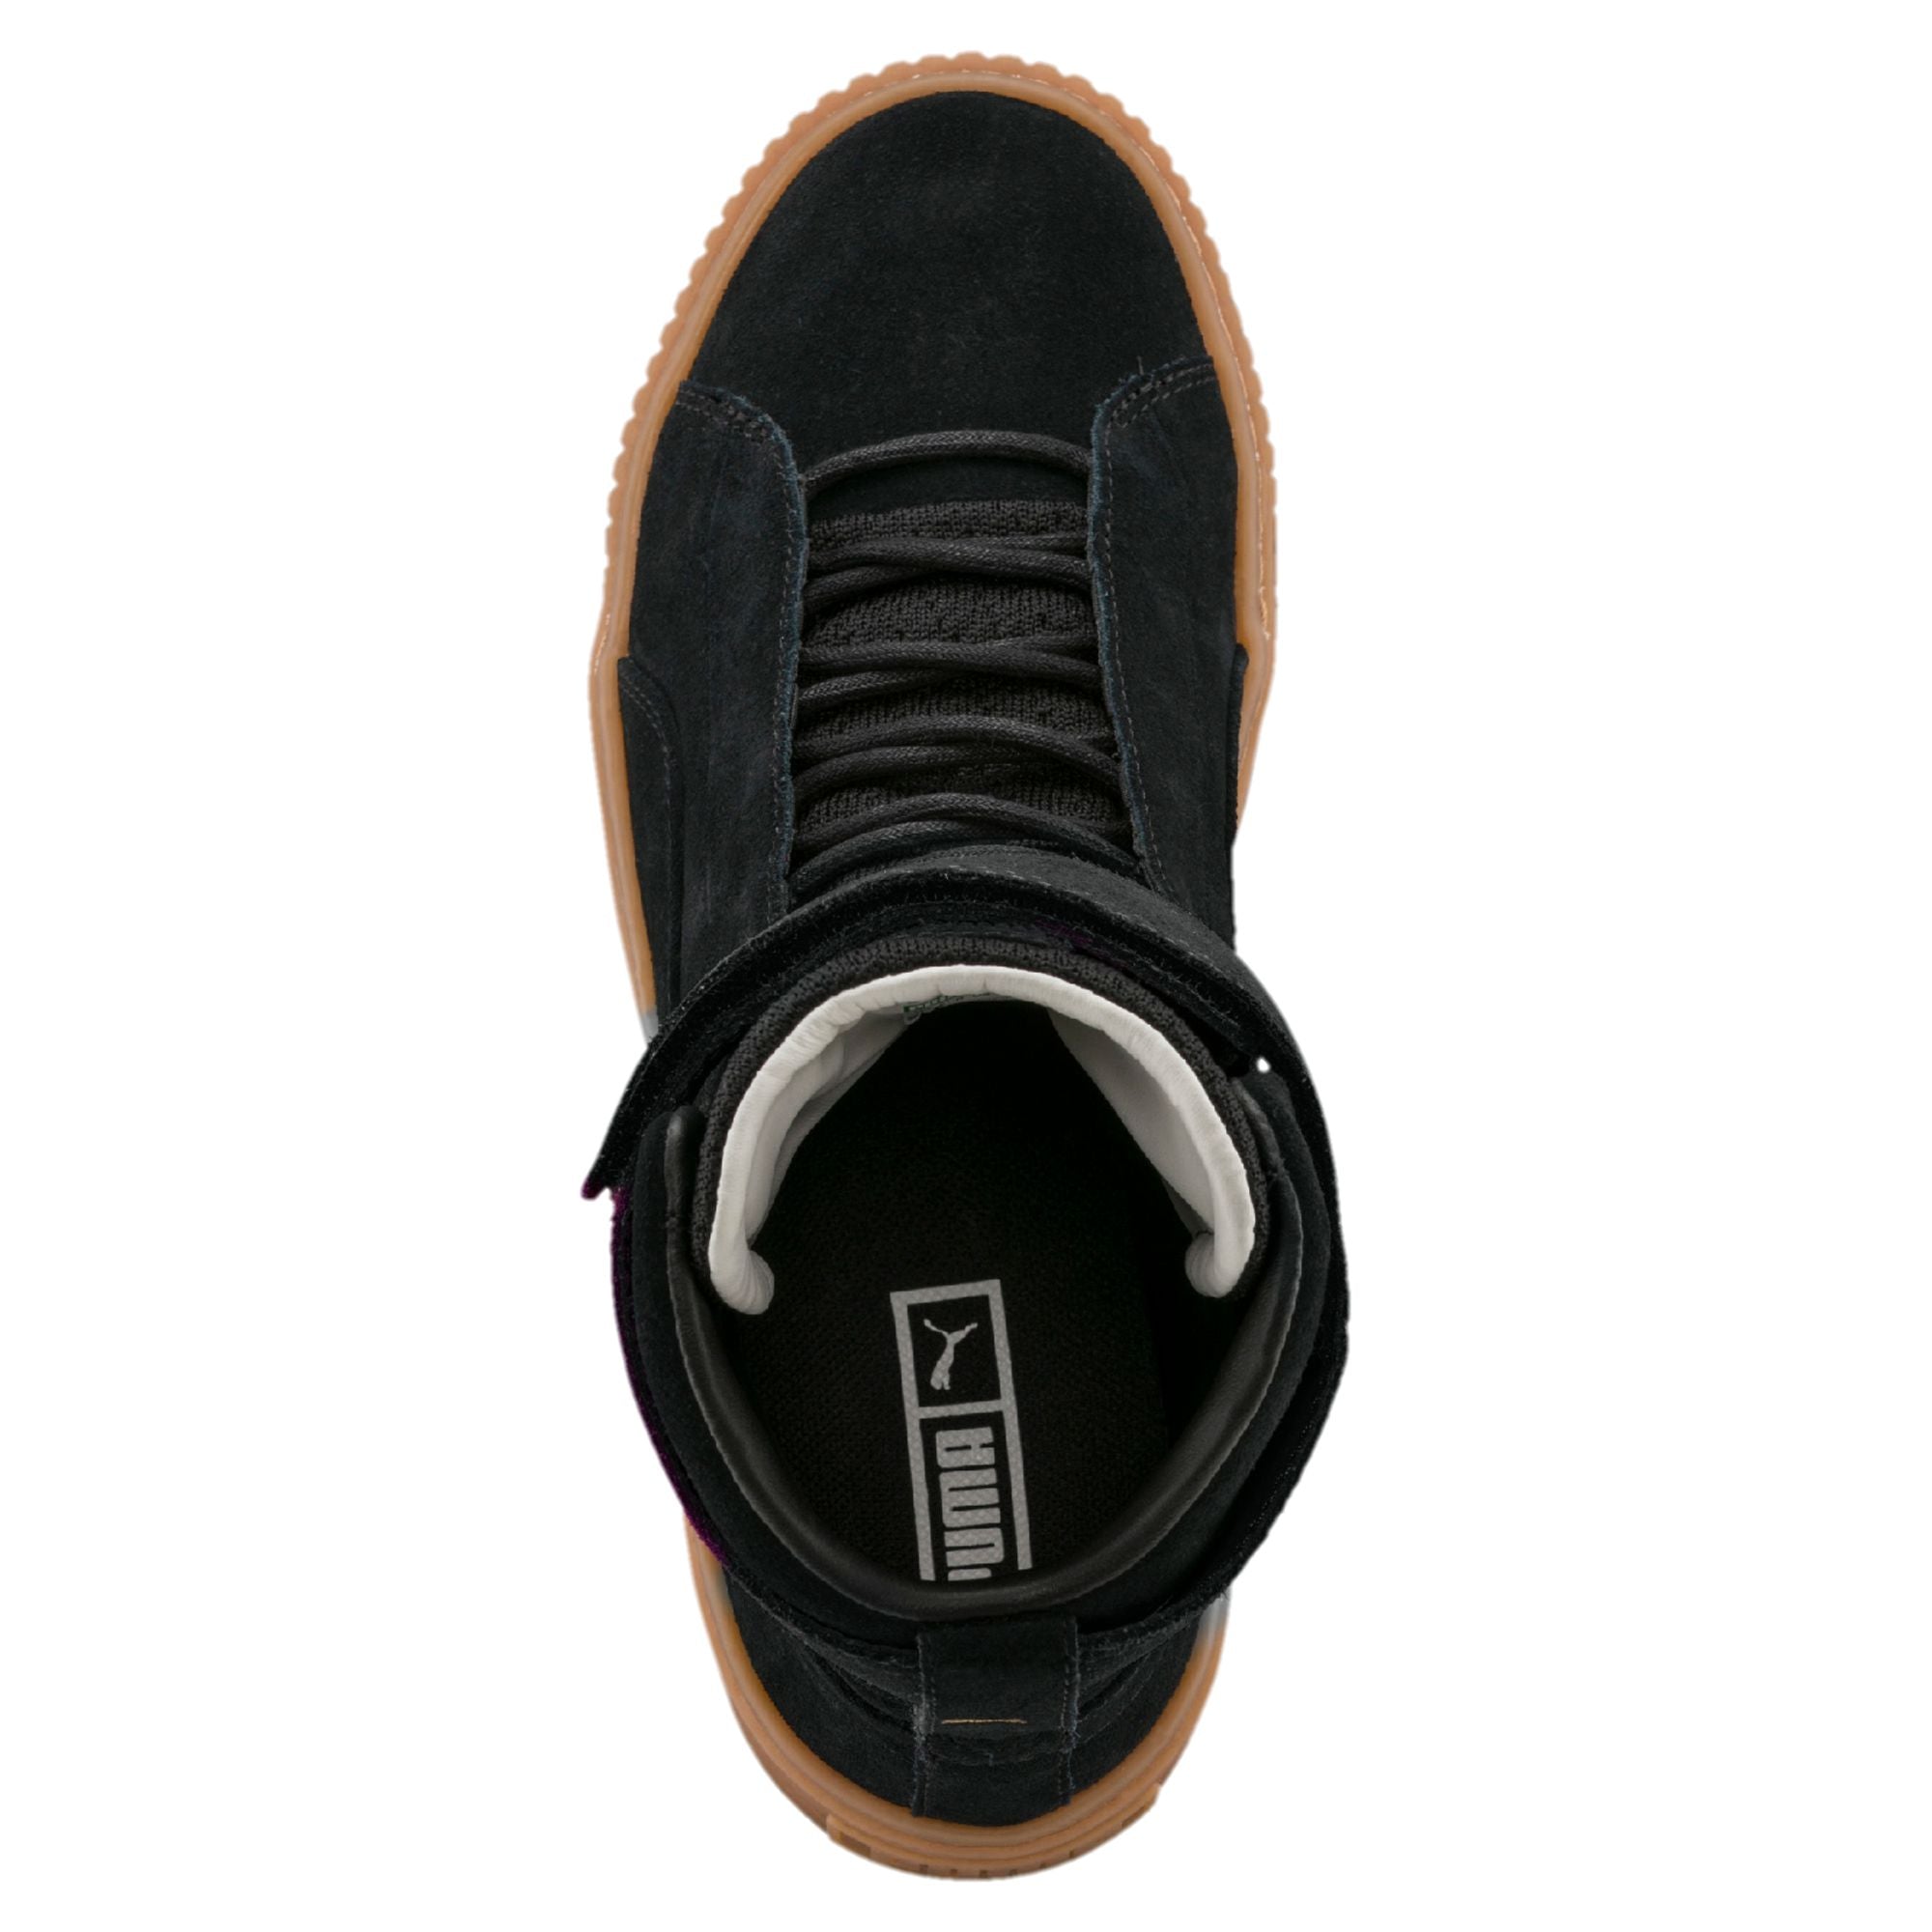 puma platform mid ow womens high top sneakers